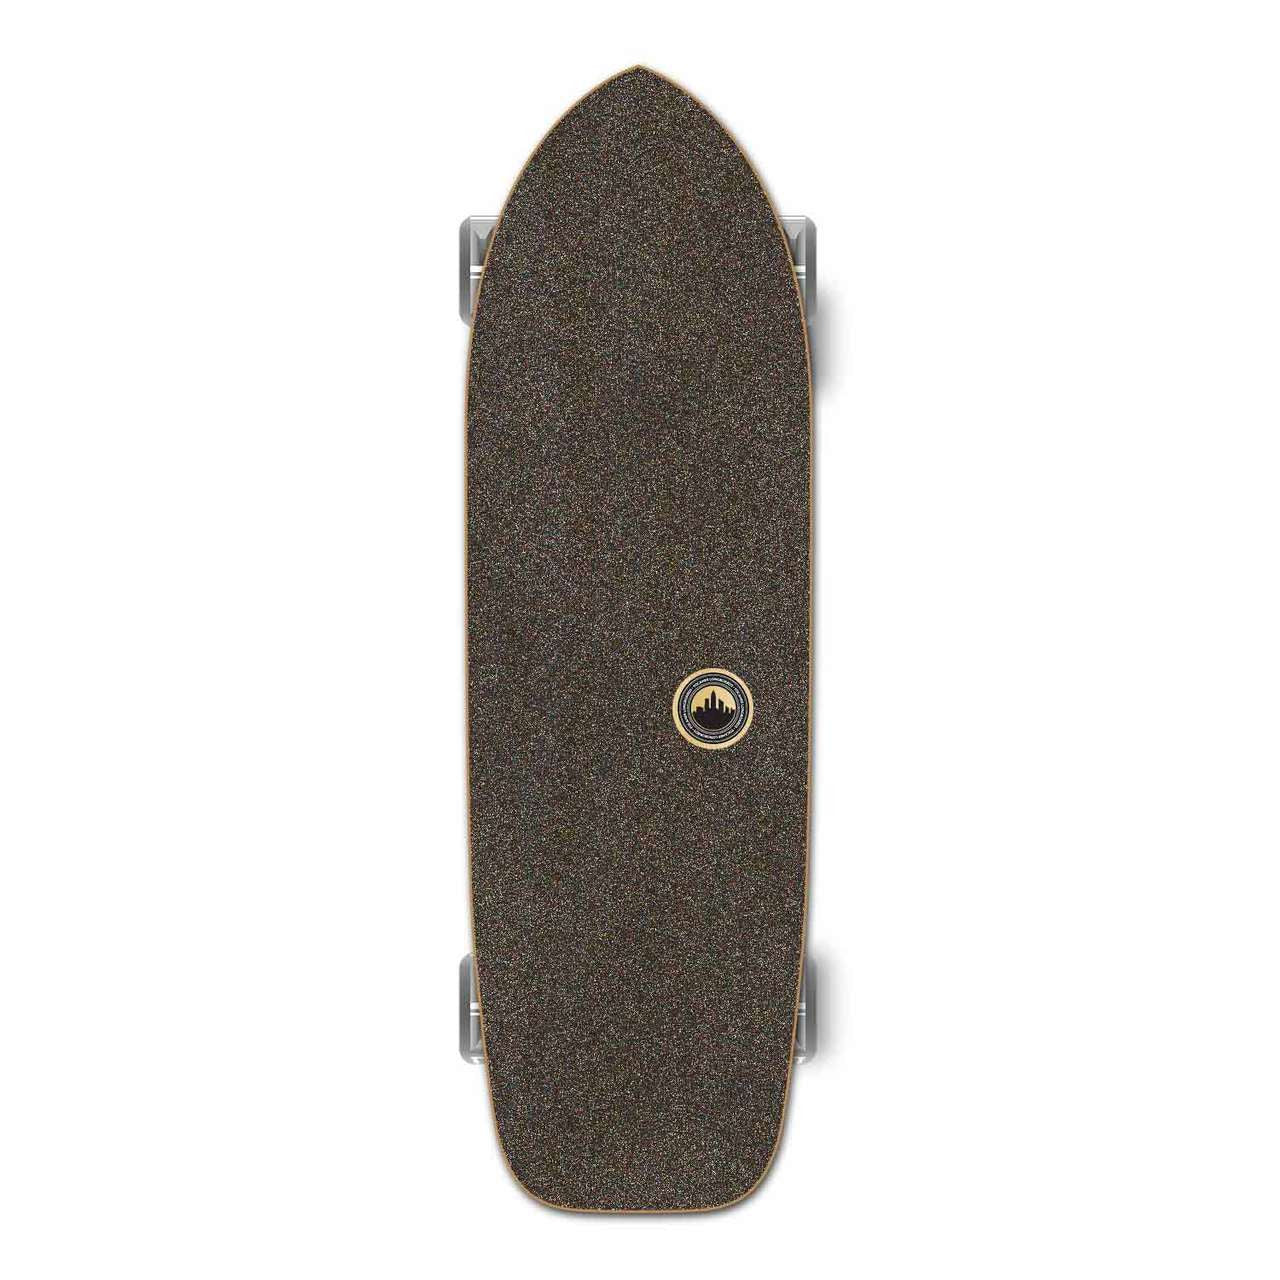 Yocaher Old School Longboard Complete - Checker White